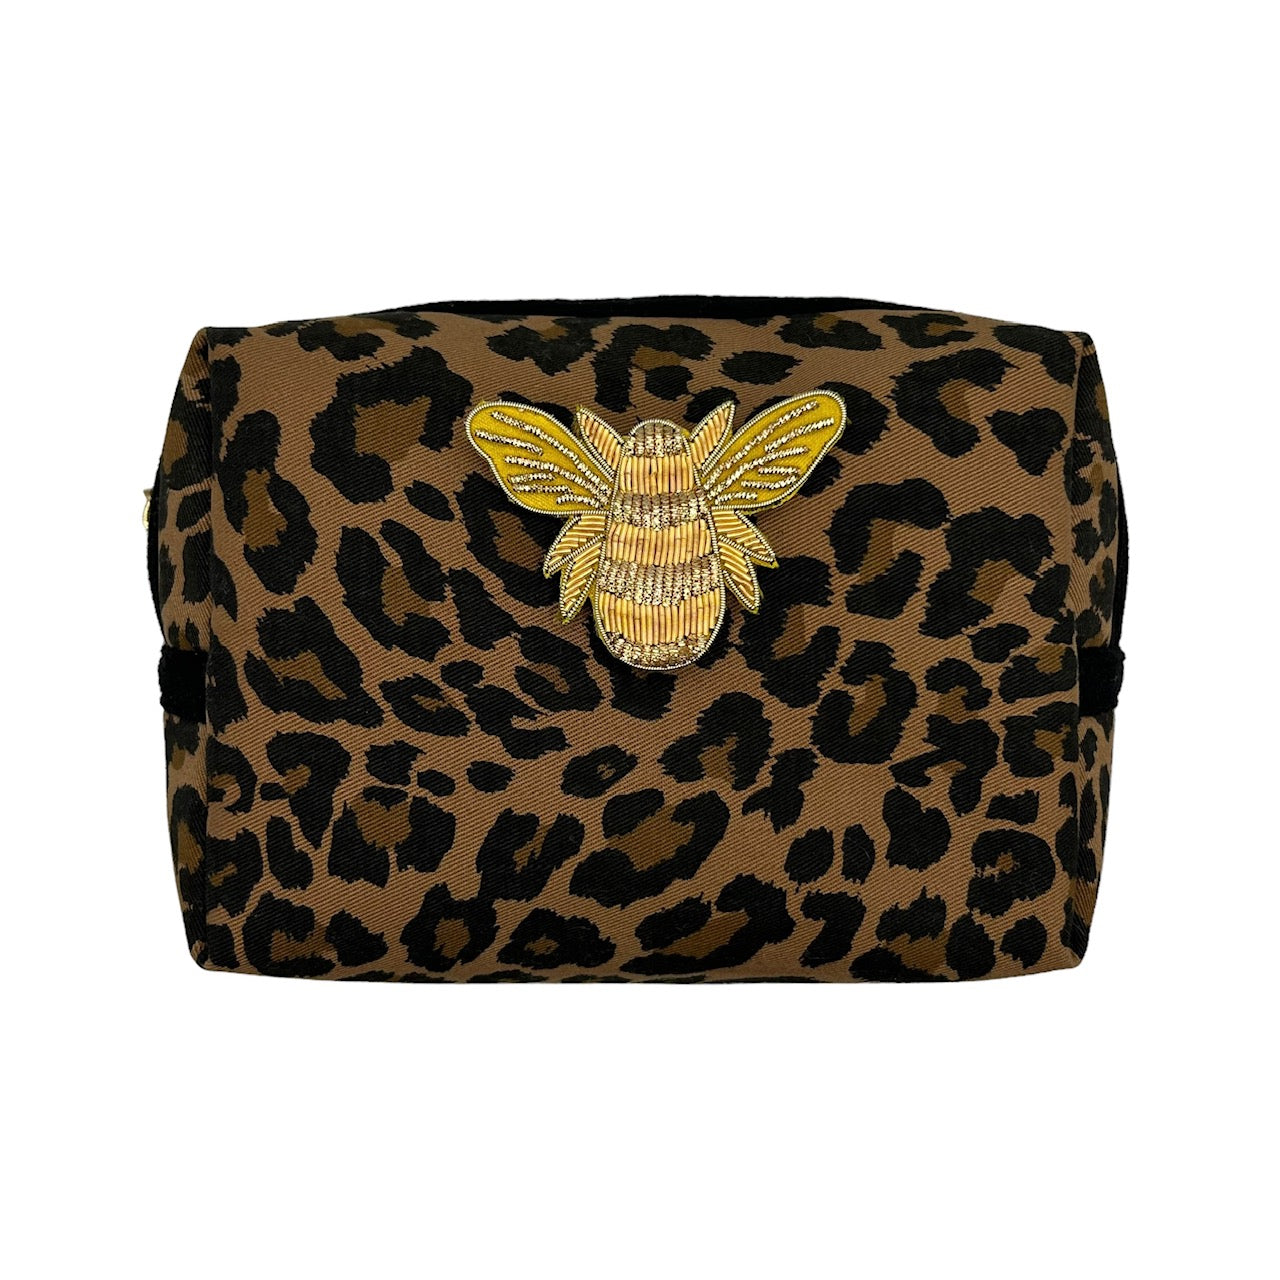 Leopard print make-up bag, large and small, with a gold bee brooch